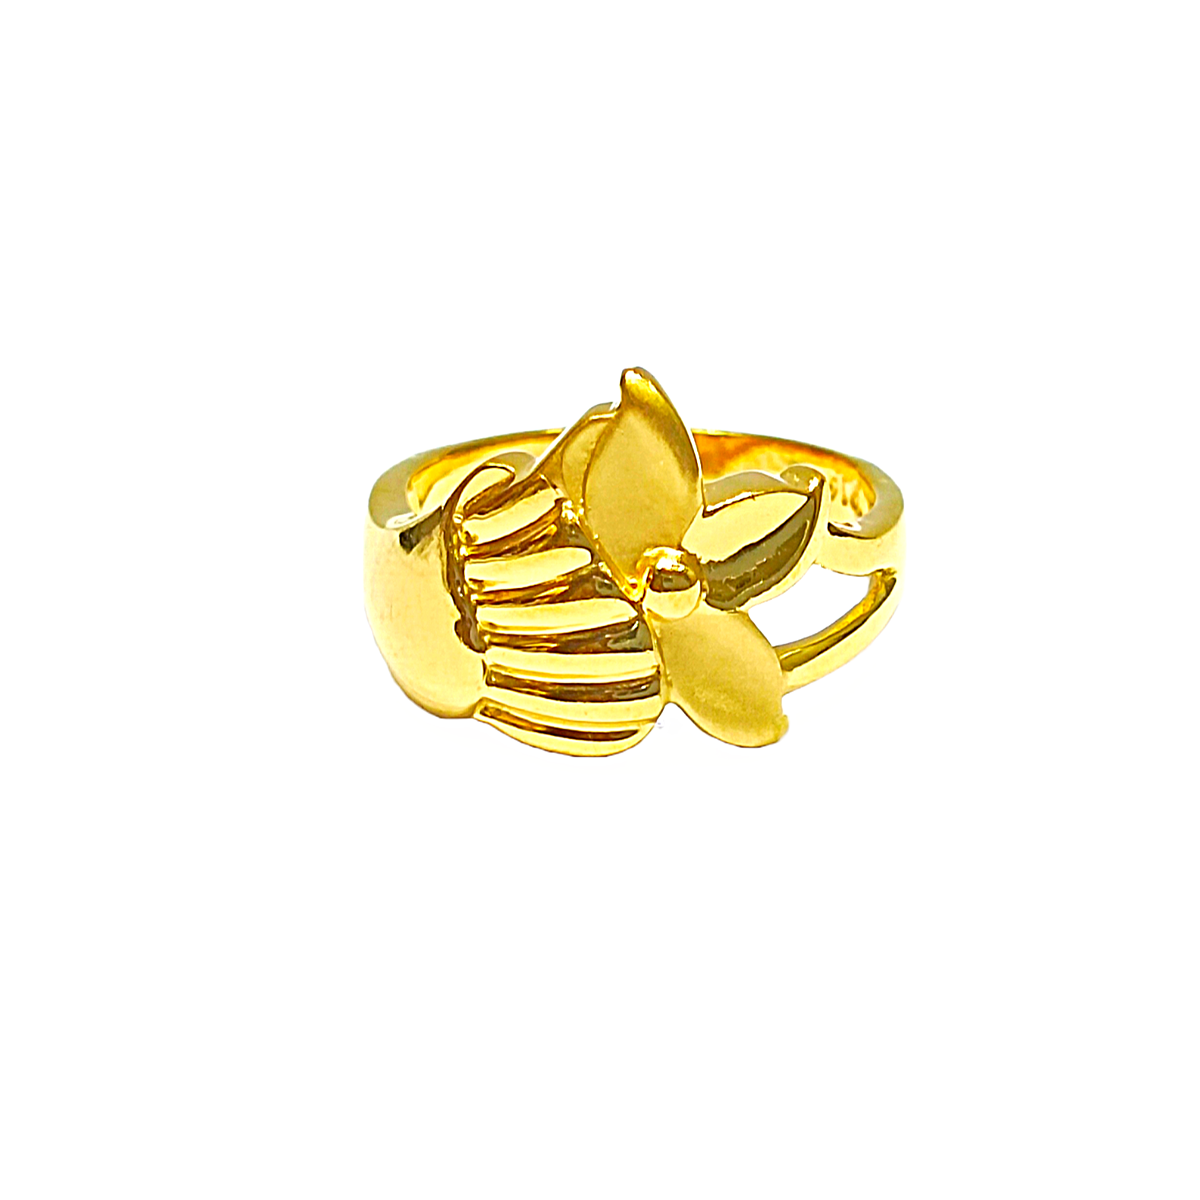 Chand gold ring